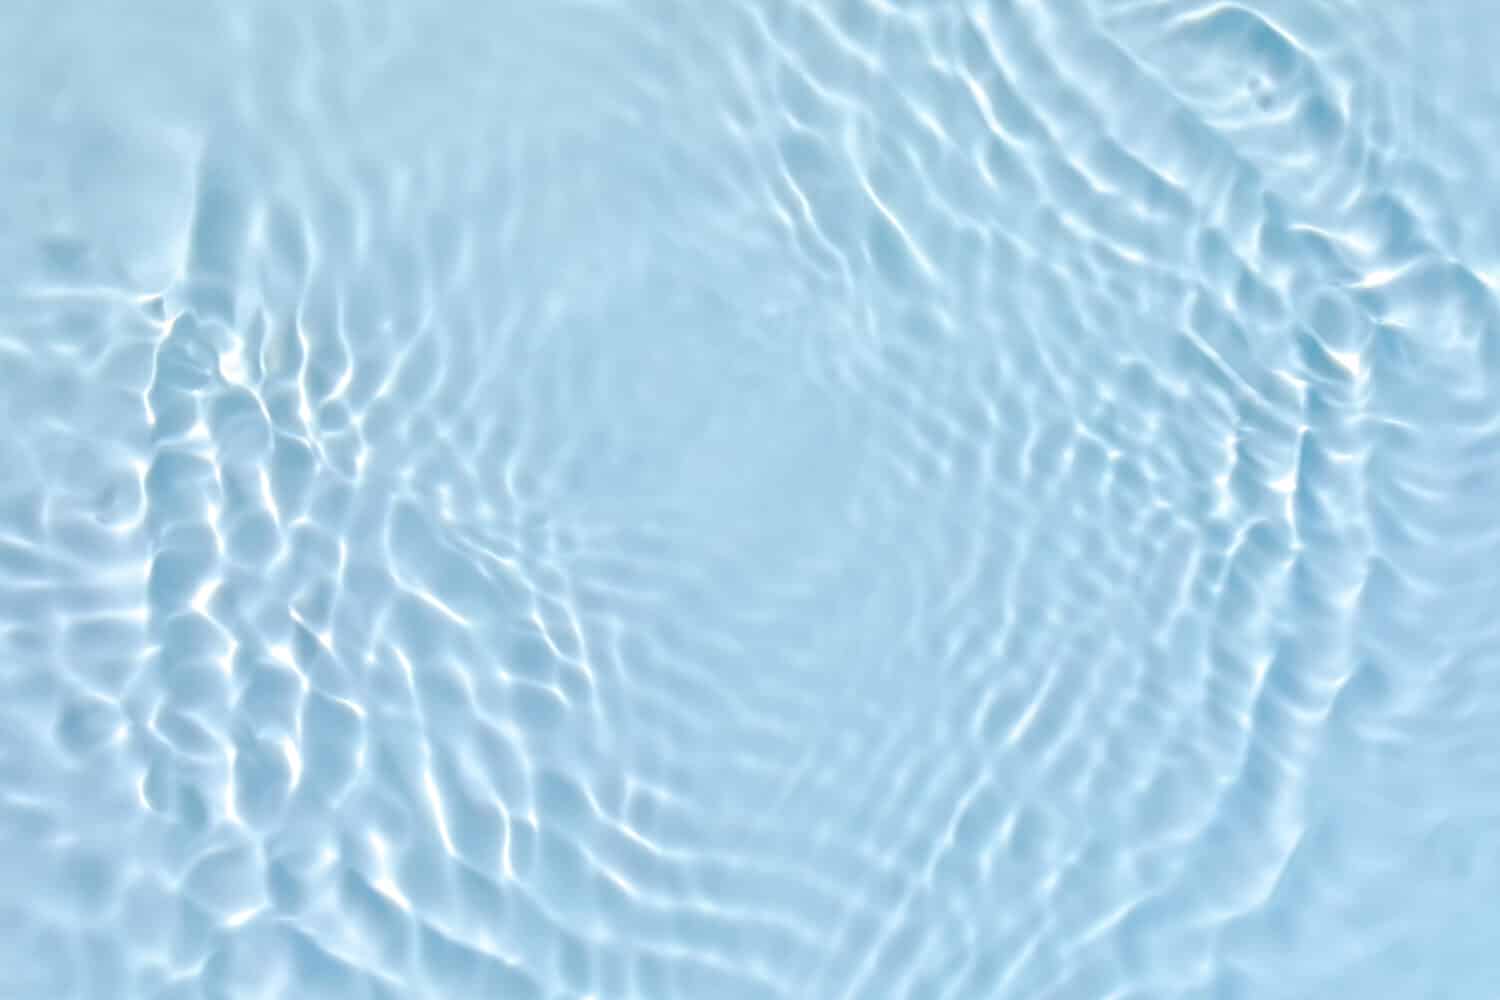 Blurred transparent blue colored clear calm water surface texture with splashes and bubbles. Trendy abstract nature background. Water waves in sunlight.